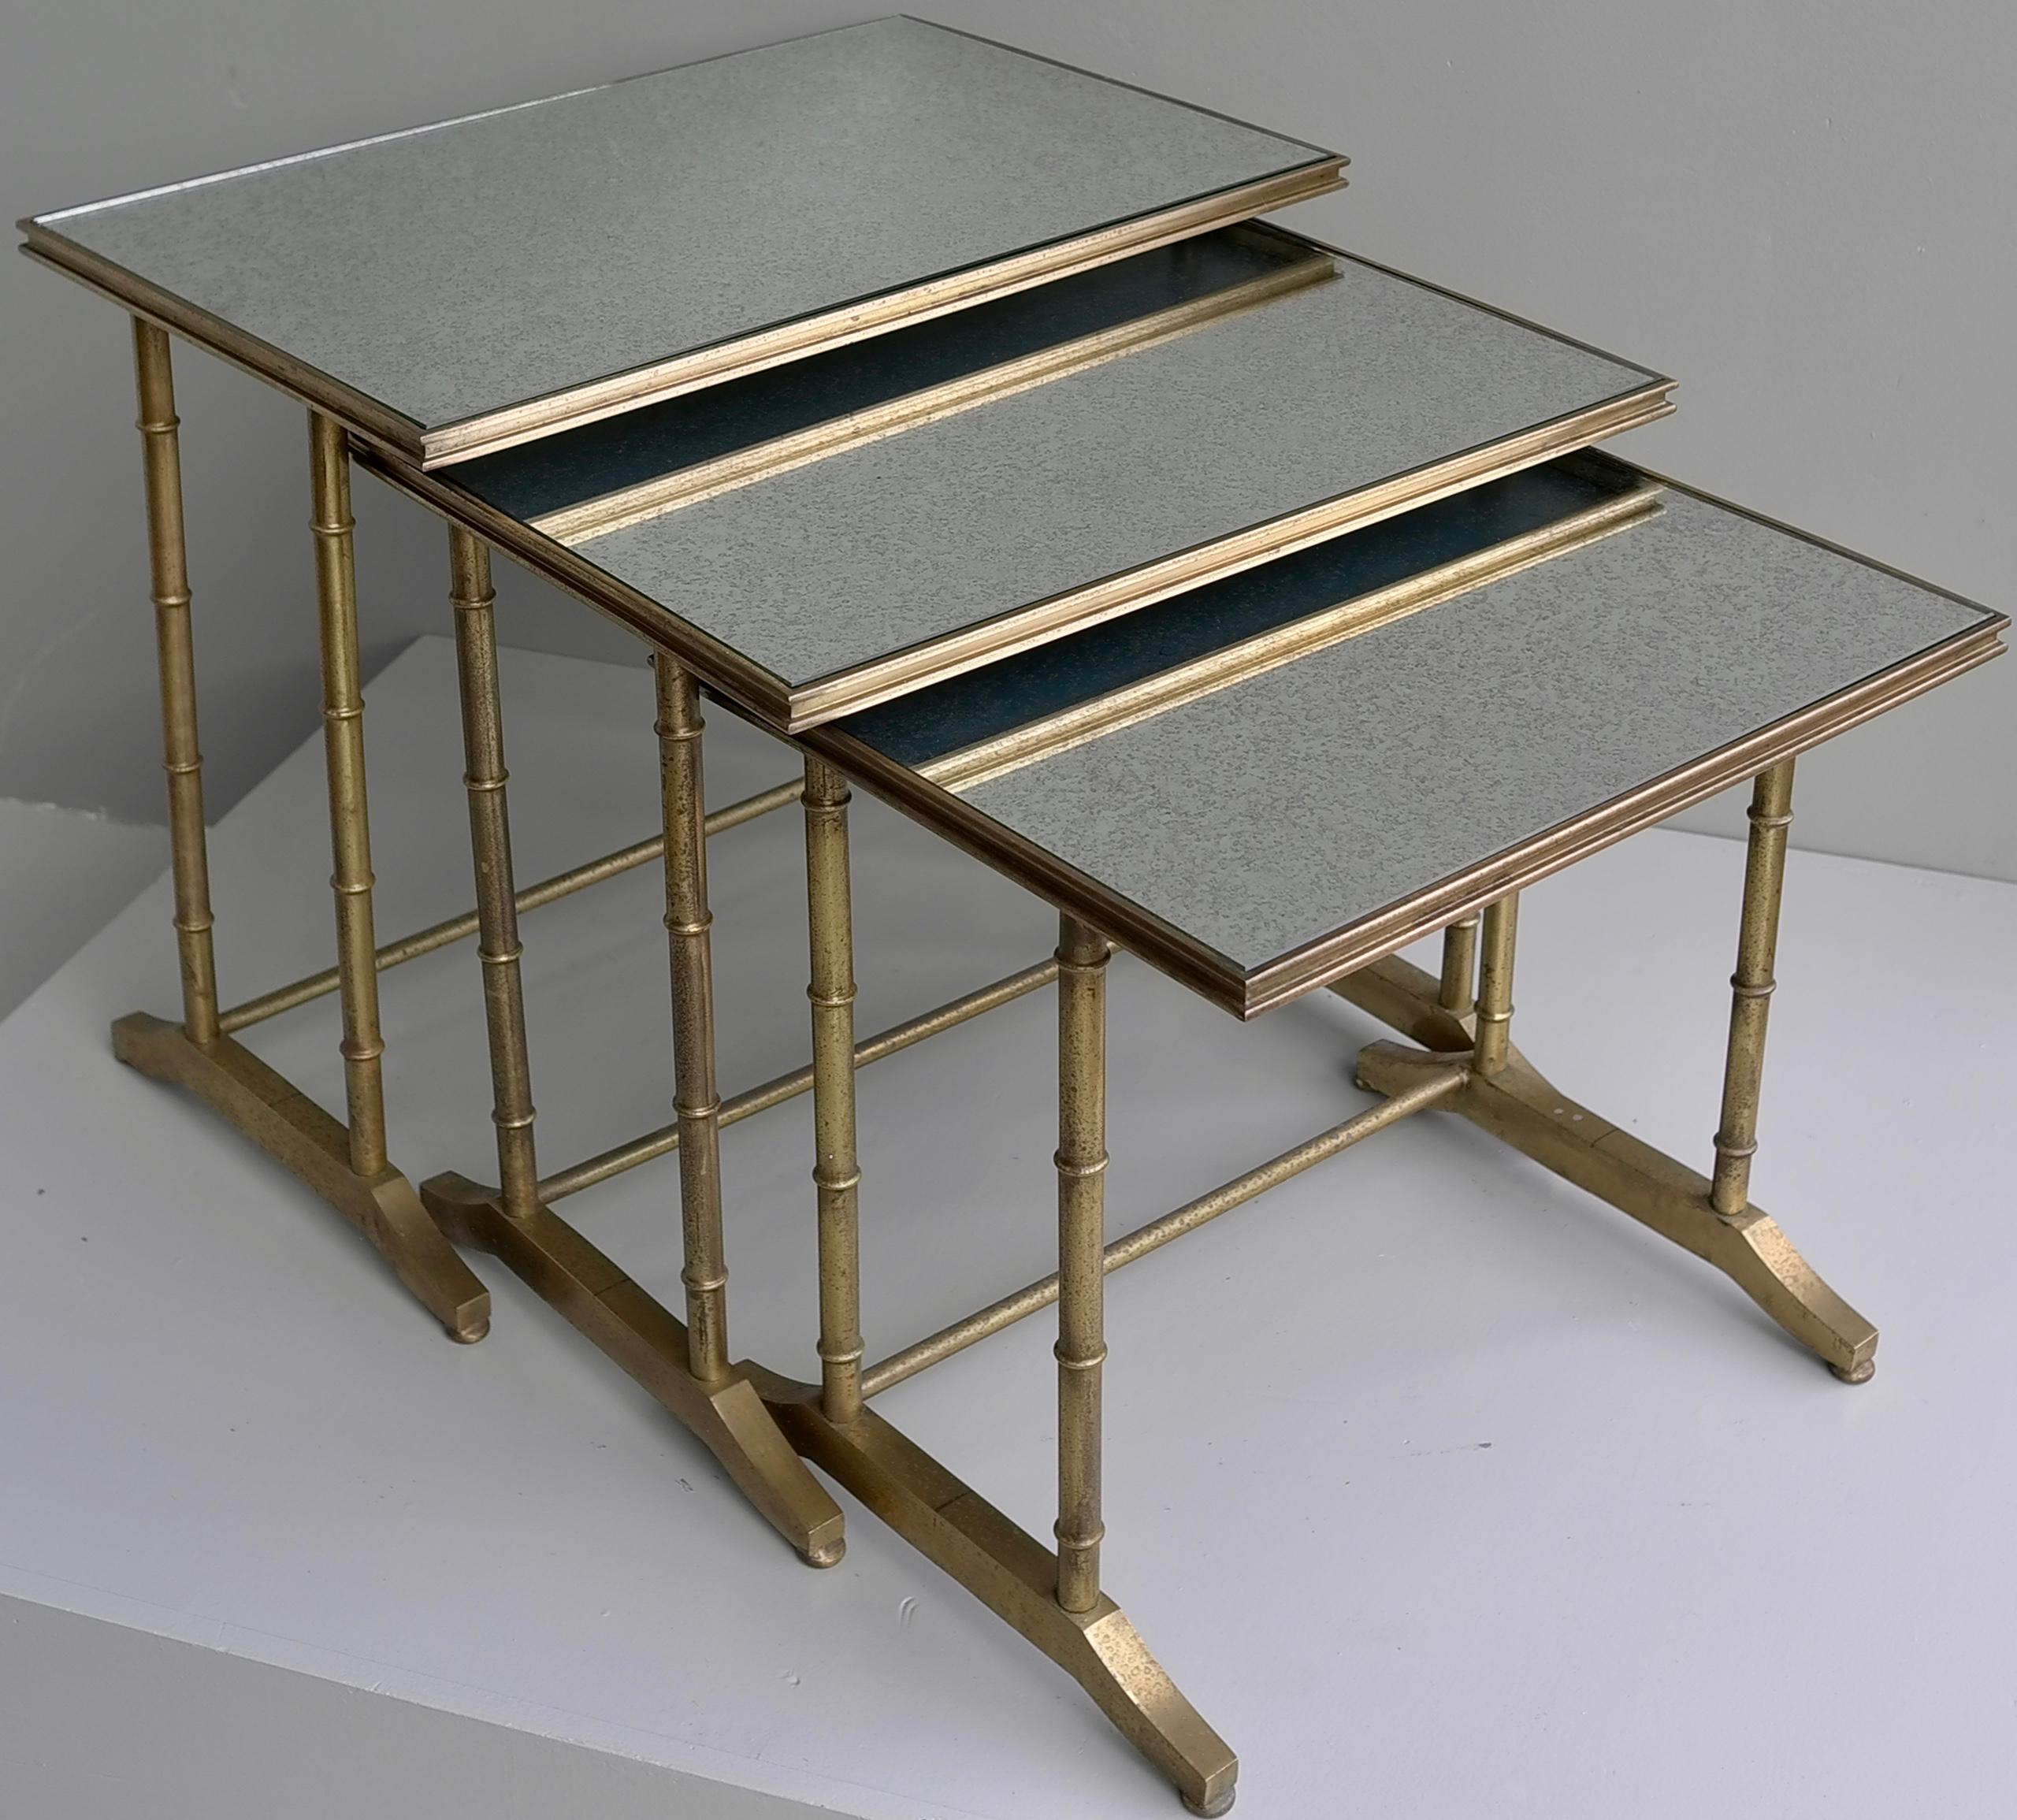 Maison bagues Faux Bamboo Nesting tables, Brass and Mirror Glass, France 1960's.

In Solid brass with aged mirror tops.

Measures: Largest: 66cm x 41cm x 54.5
Middle: 59cm x 40.5cm x 50cm
smallest: 52cm x 41cm x 47cm.